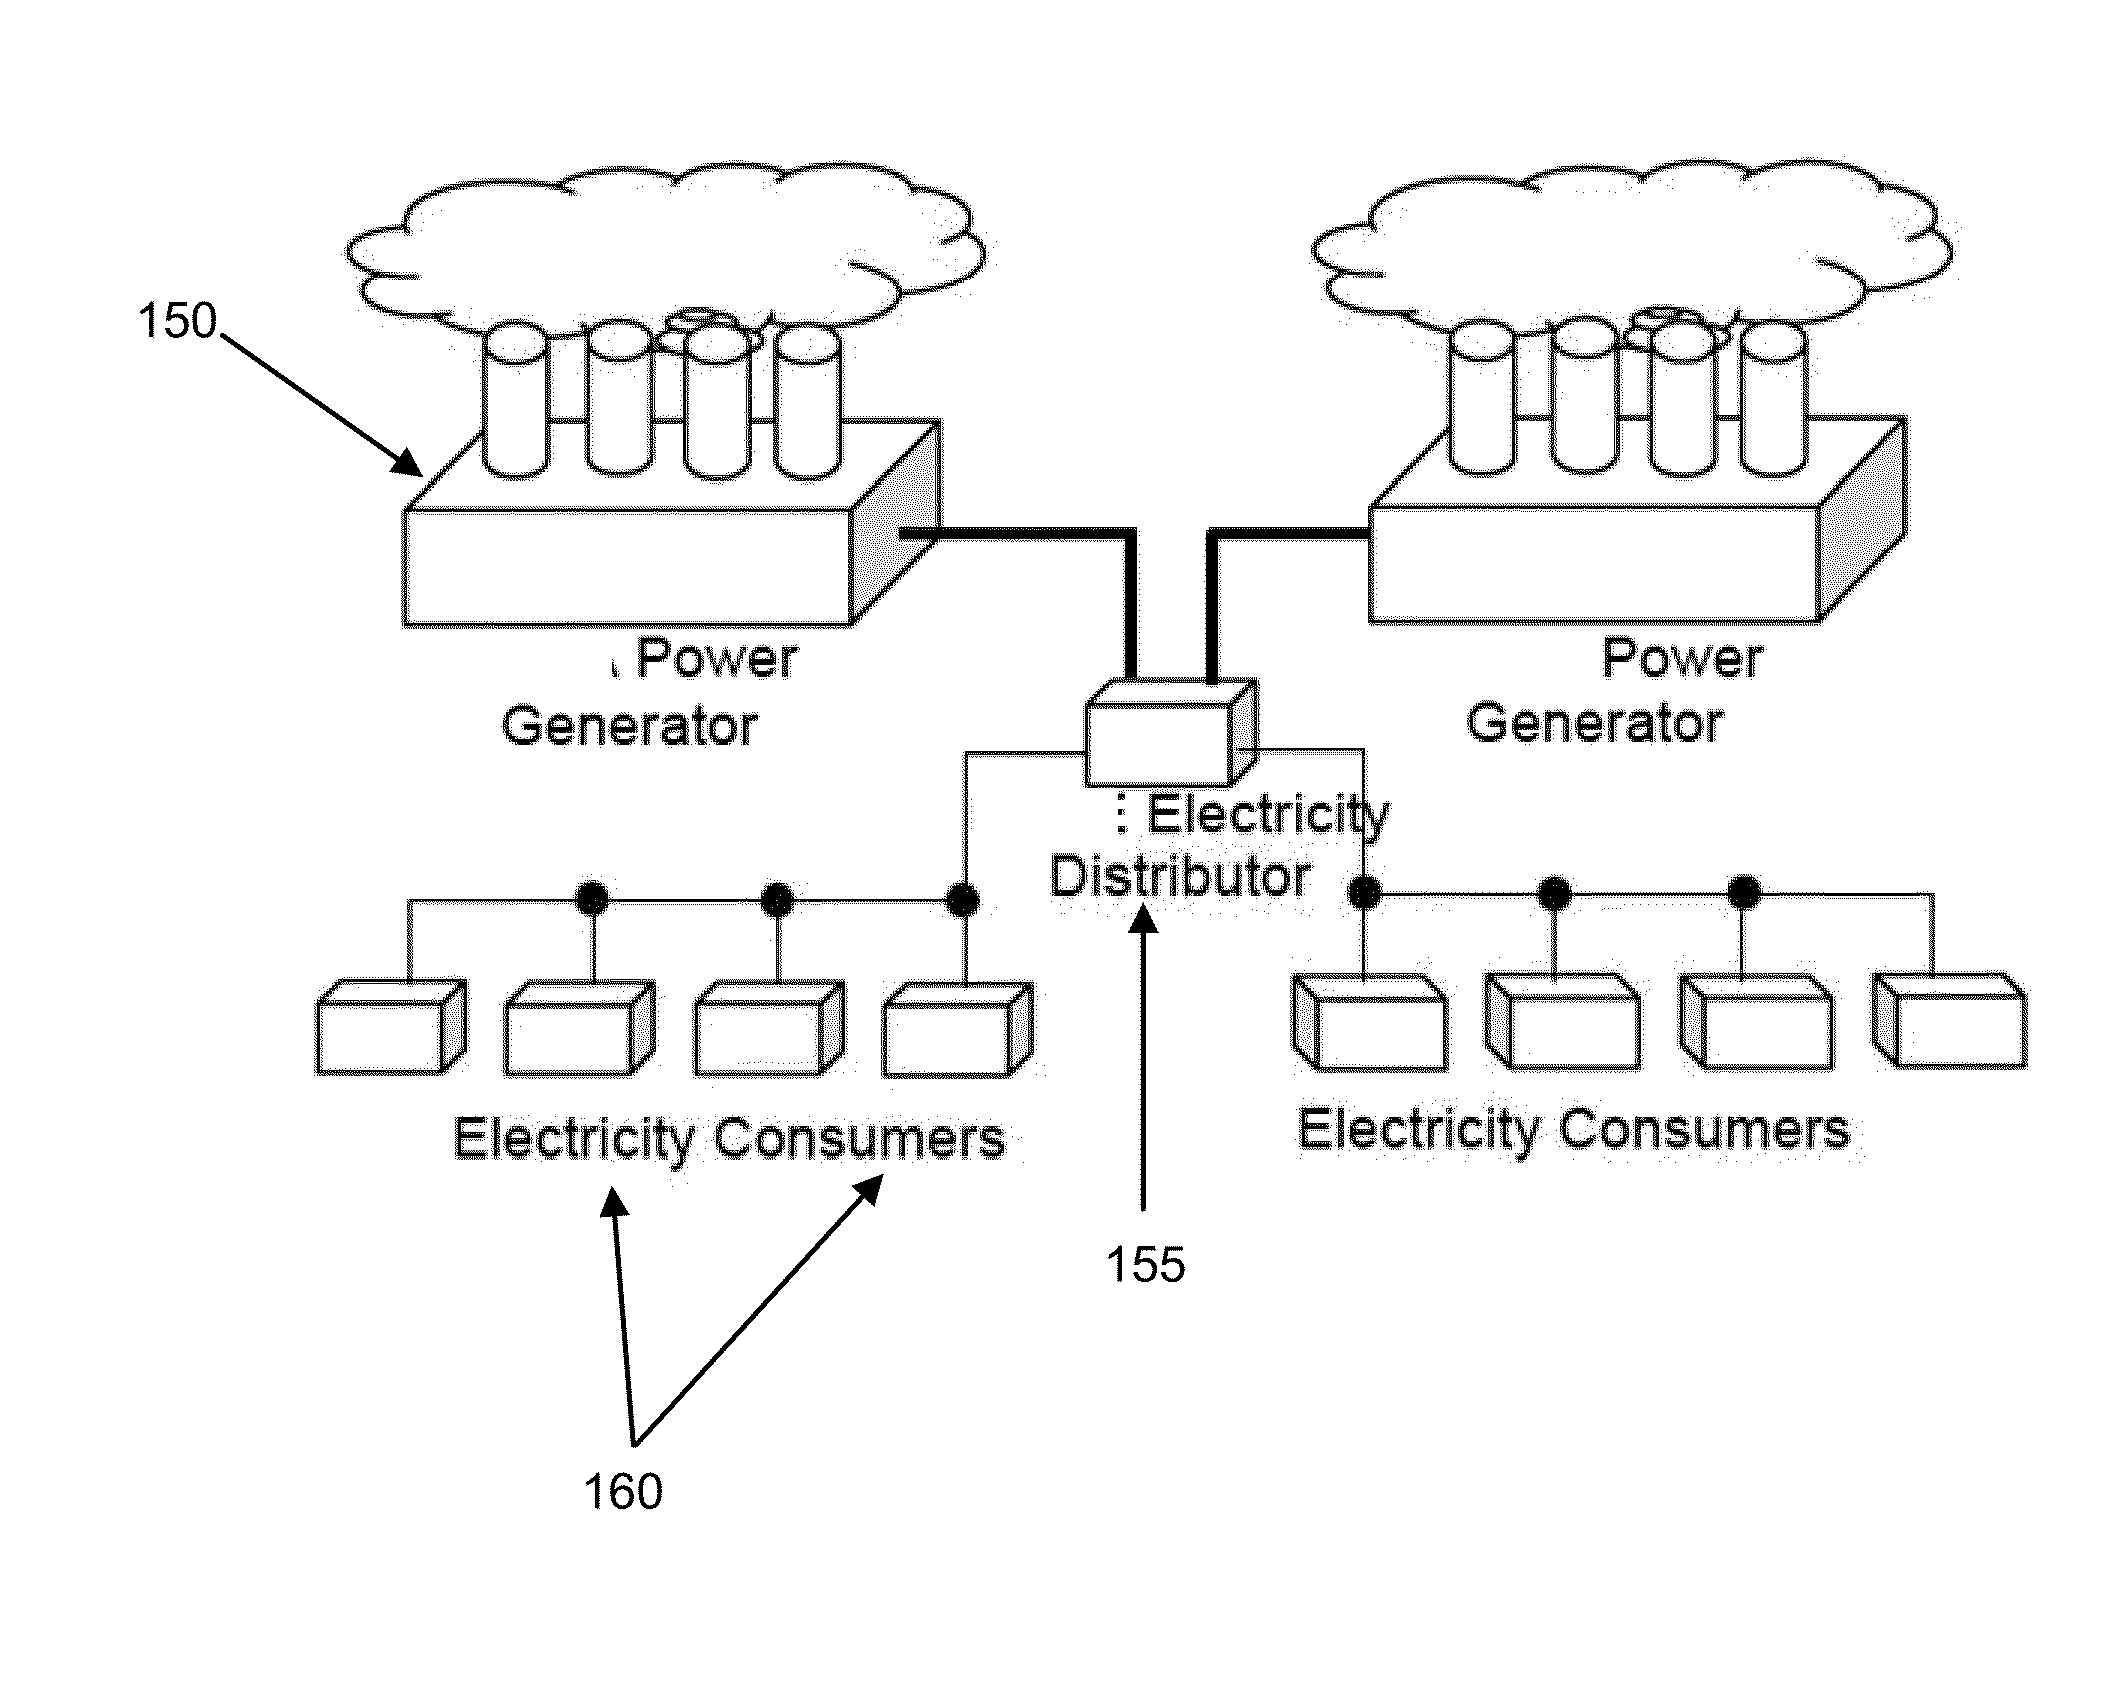 Method and apparatus to form a virtual power generation collective from a distributed network of local generation facilities